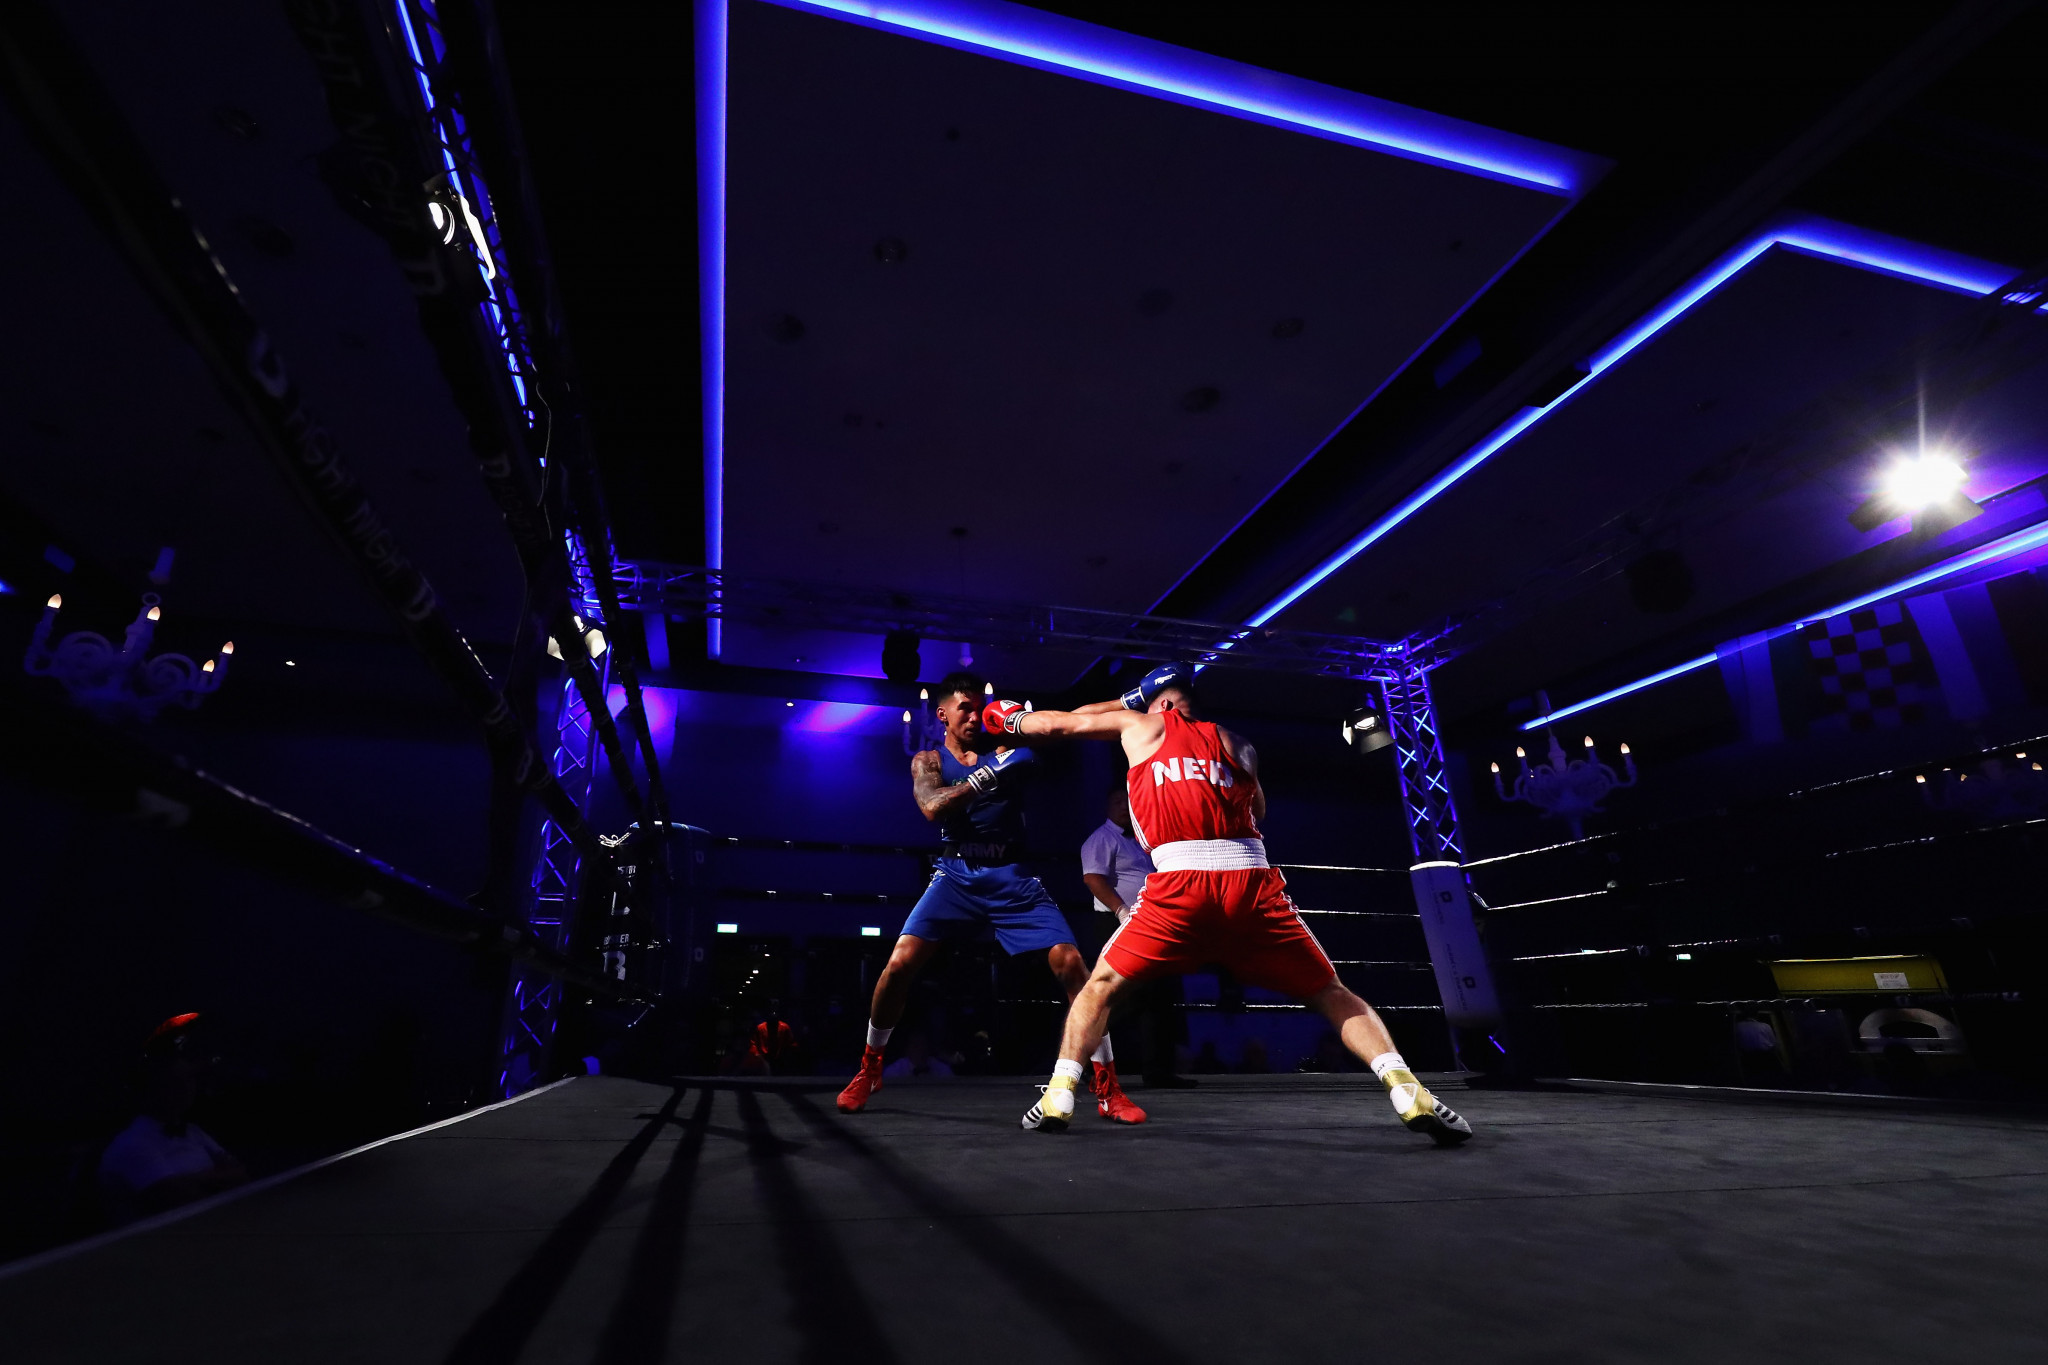 The Dutch Boxing Federation is set to discuss its suspension at the organisation's forthcoming General Assembly ©Getty Images